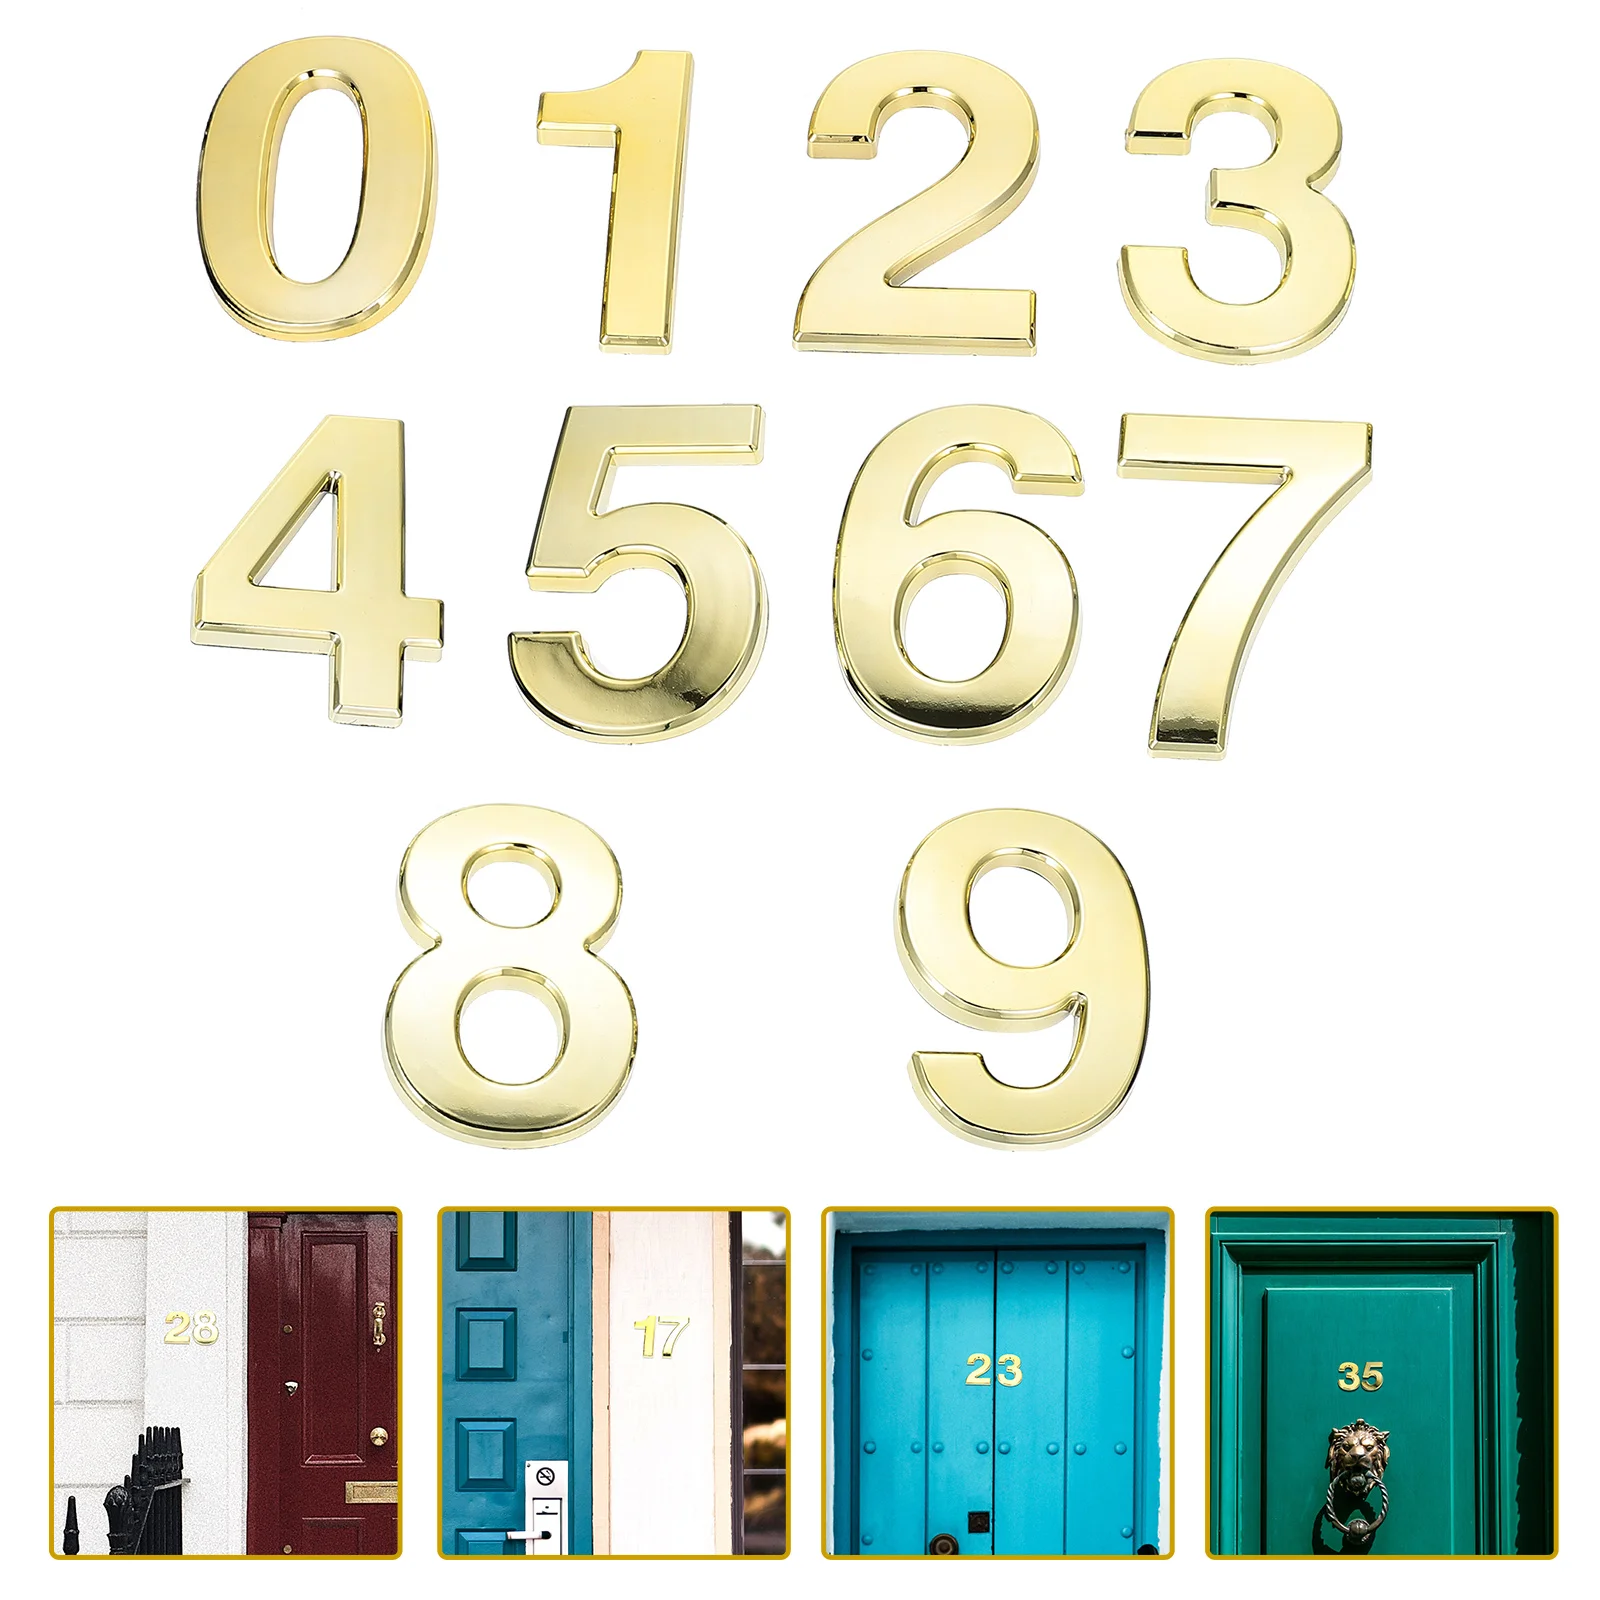 

10 Pcs 10cm Digital Door Plate Home Supplies 0-9 Number Front Numbers Stickers Mailbox Self-adhesive House Sign Houtel